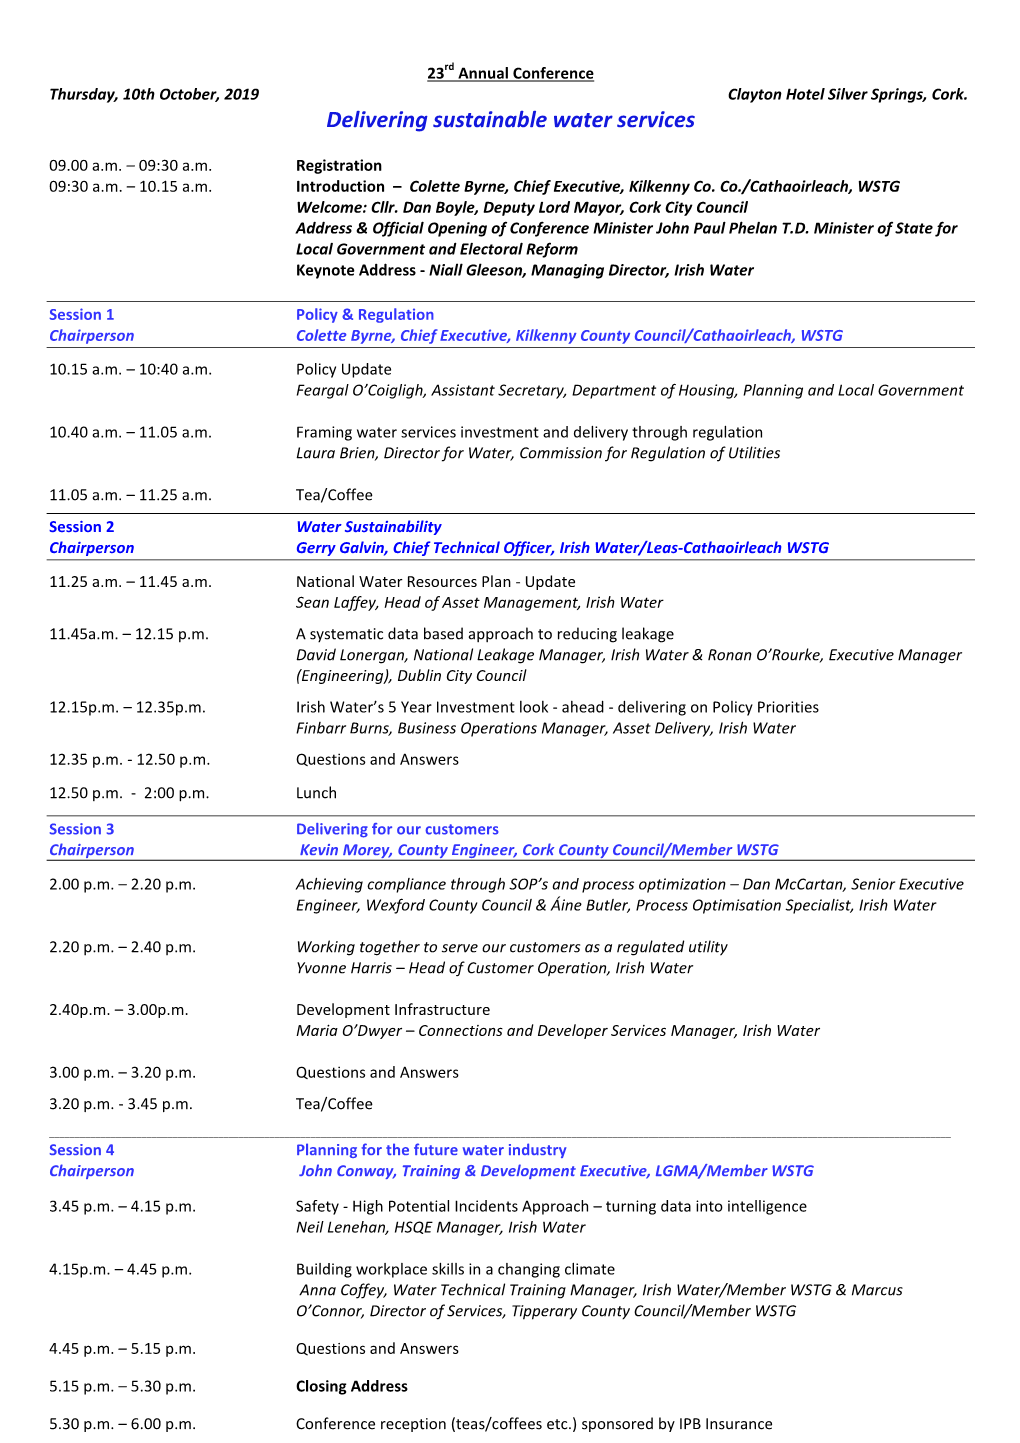 2019 Annual Conference Programme.Pdf